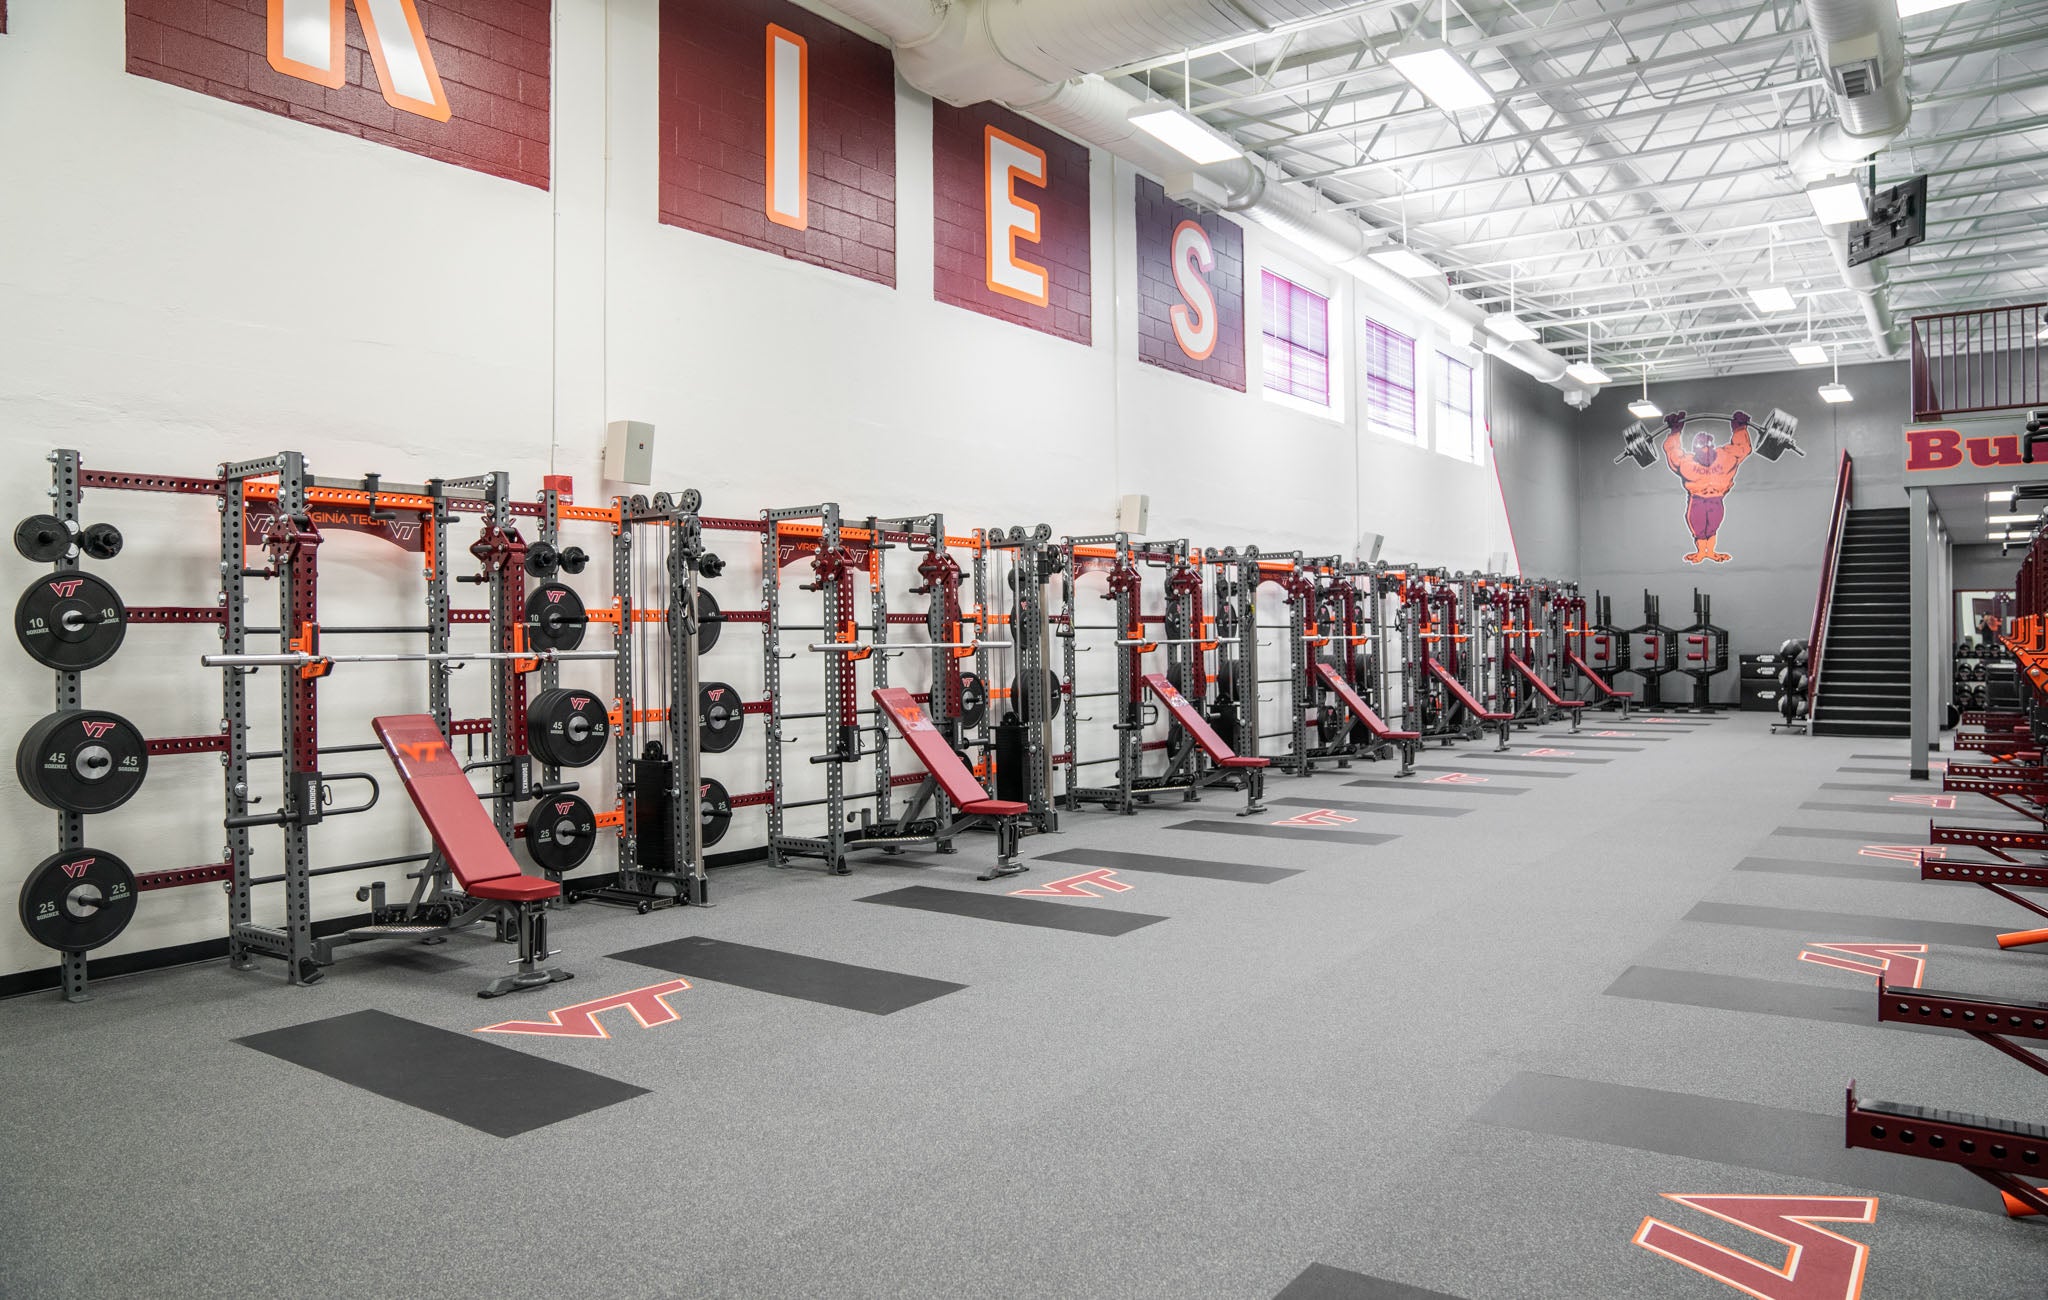 Virginia Tech Strength and Conditioning